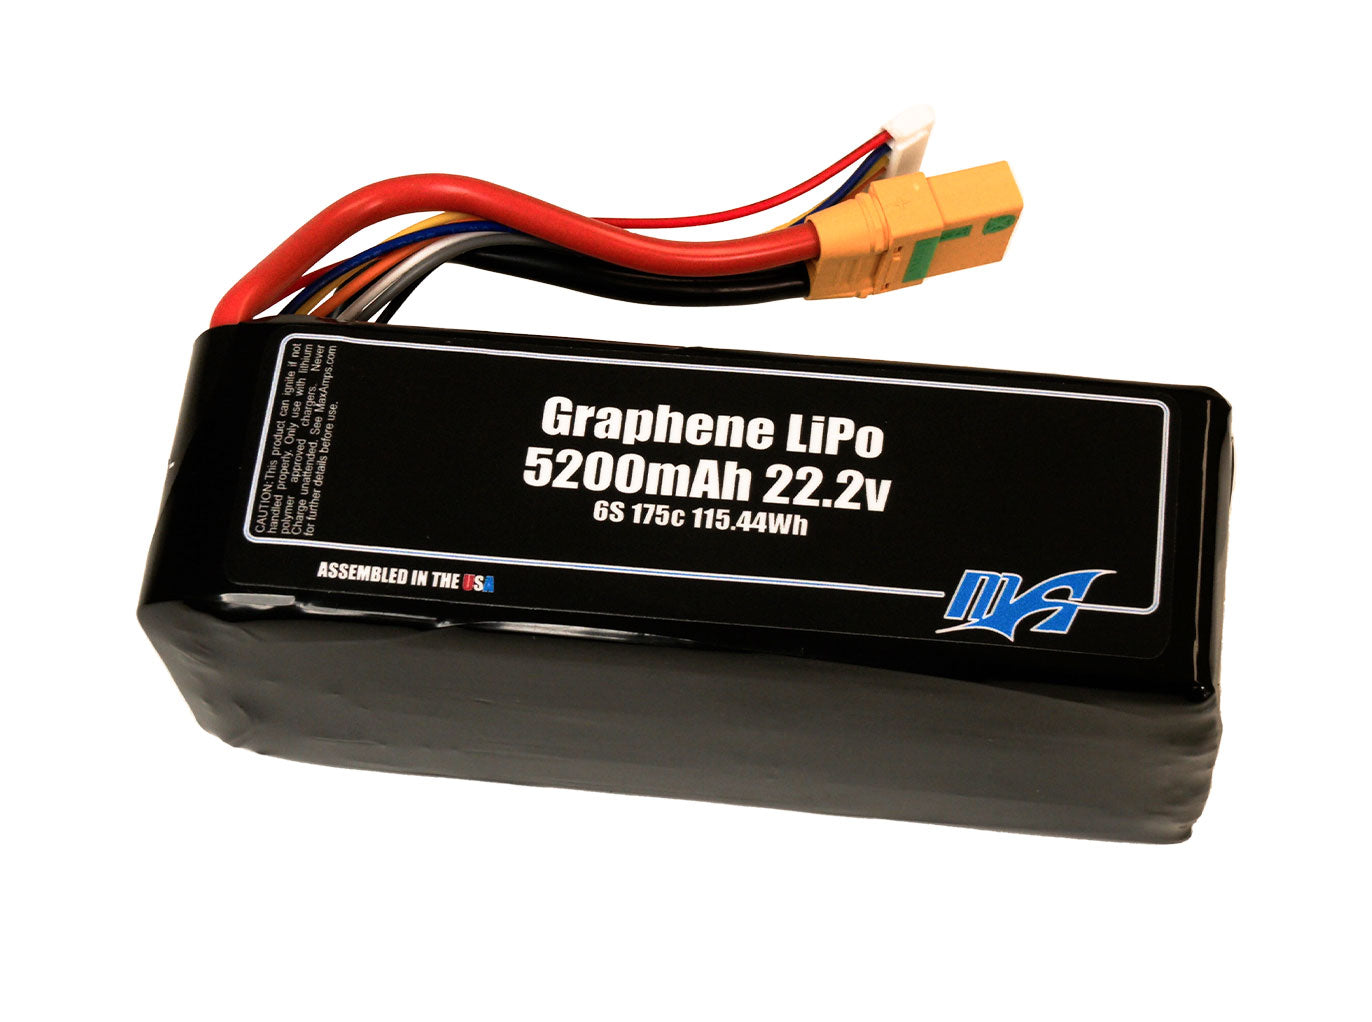 A MaxAmps Graphene LiPo 5200mAh 6S 22.2 volt battery pack with XT90 anti-spark female